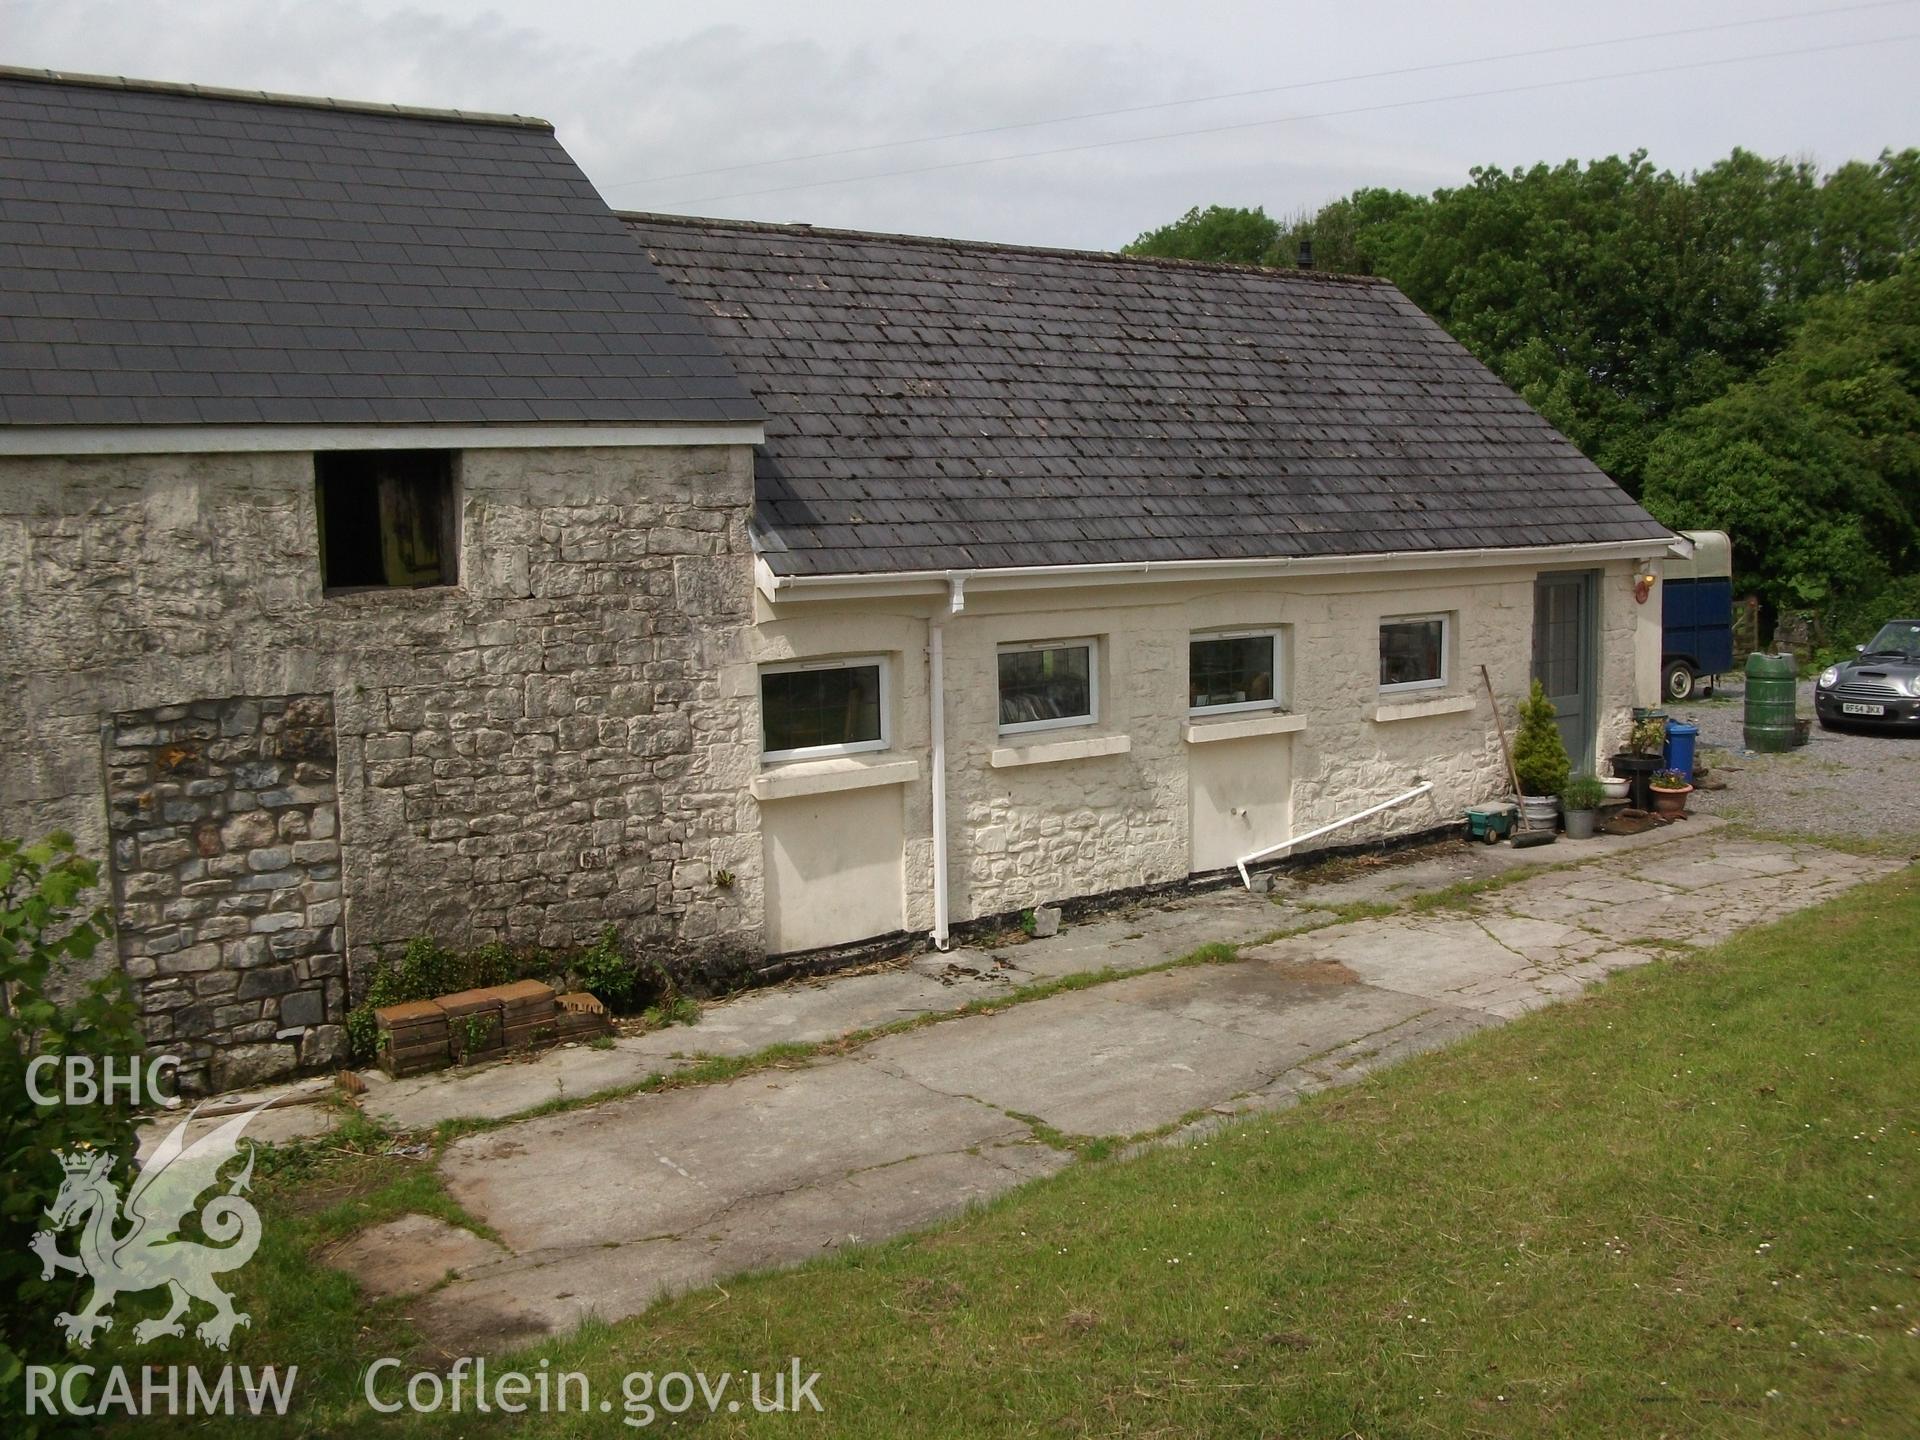 Photograph showing exterior rear elevation of cottage and attached building at Pant-y-Castell, Maesybont, Photographed by Mark Waghorn to meet a condition attached to planning application.